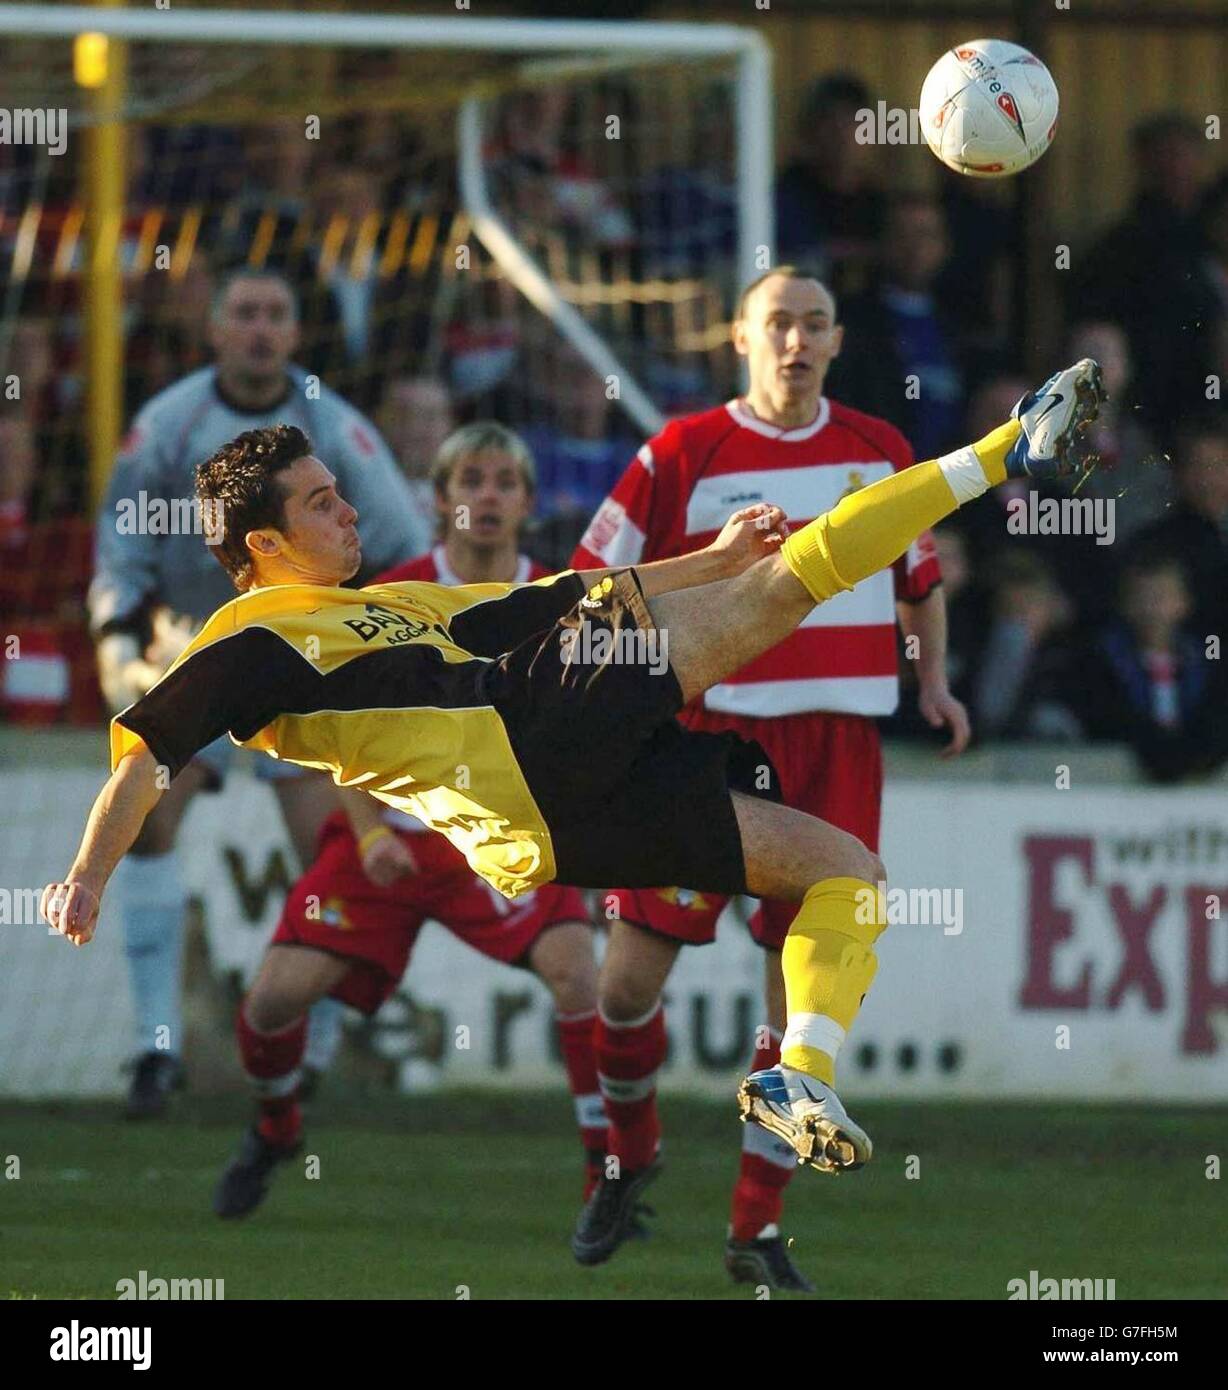 James Mudge of Tiverton fires a shot at the Doncaster goal during the FA Cup First Round match at Ladysmead, Bolham Road, Tiverton, Saturday November 13, 2004. NO UNOFFICIAL CLUB WEBSITE USE. Stock Photo